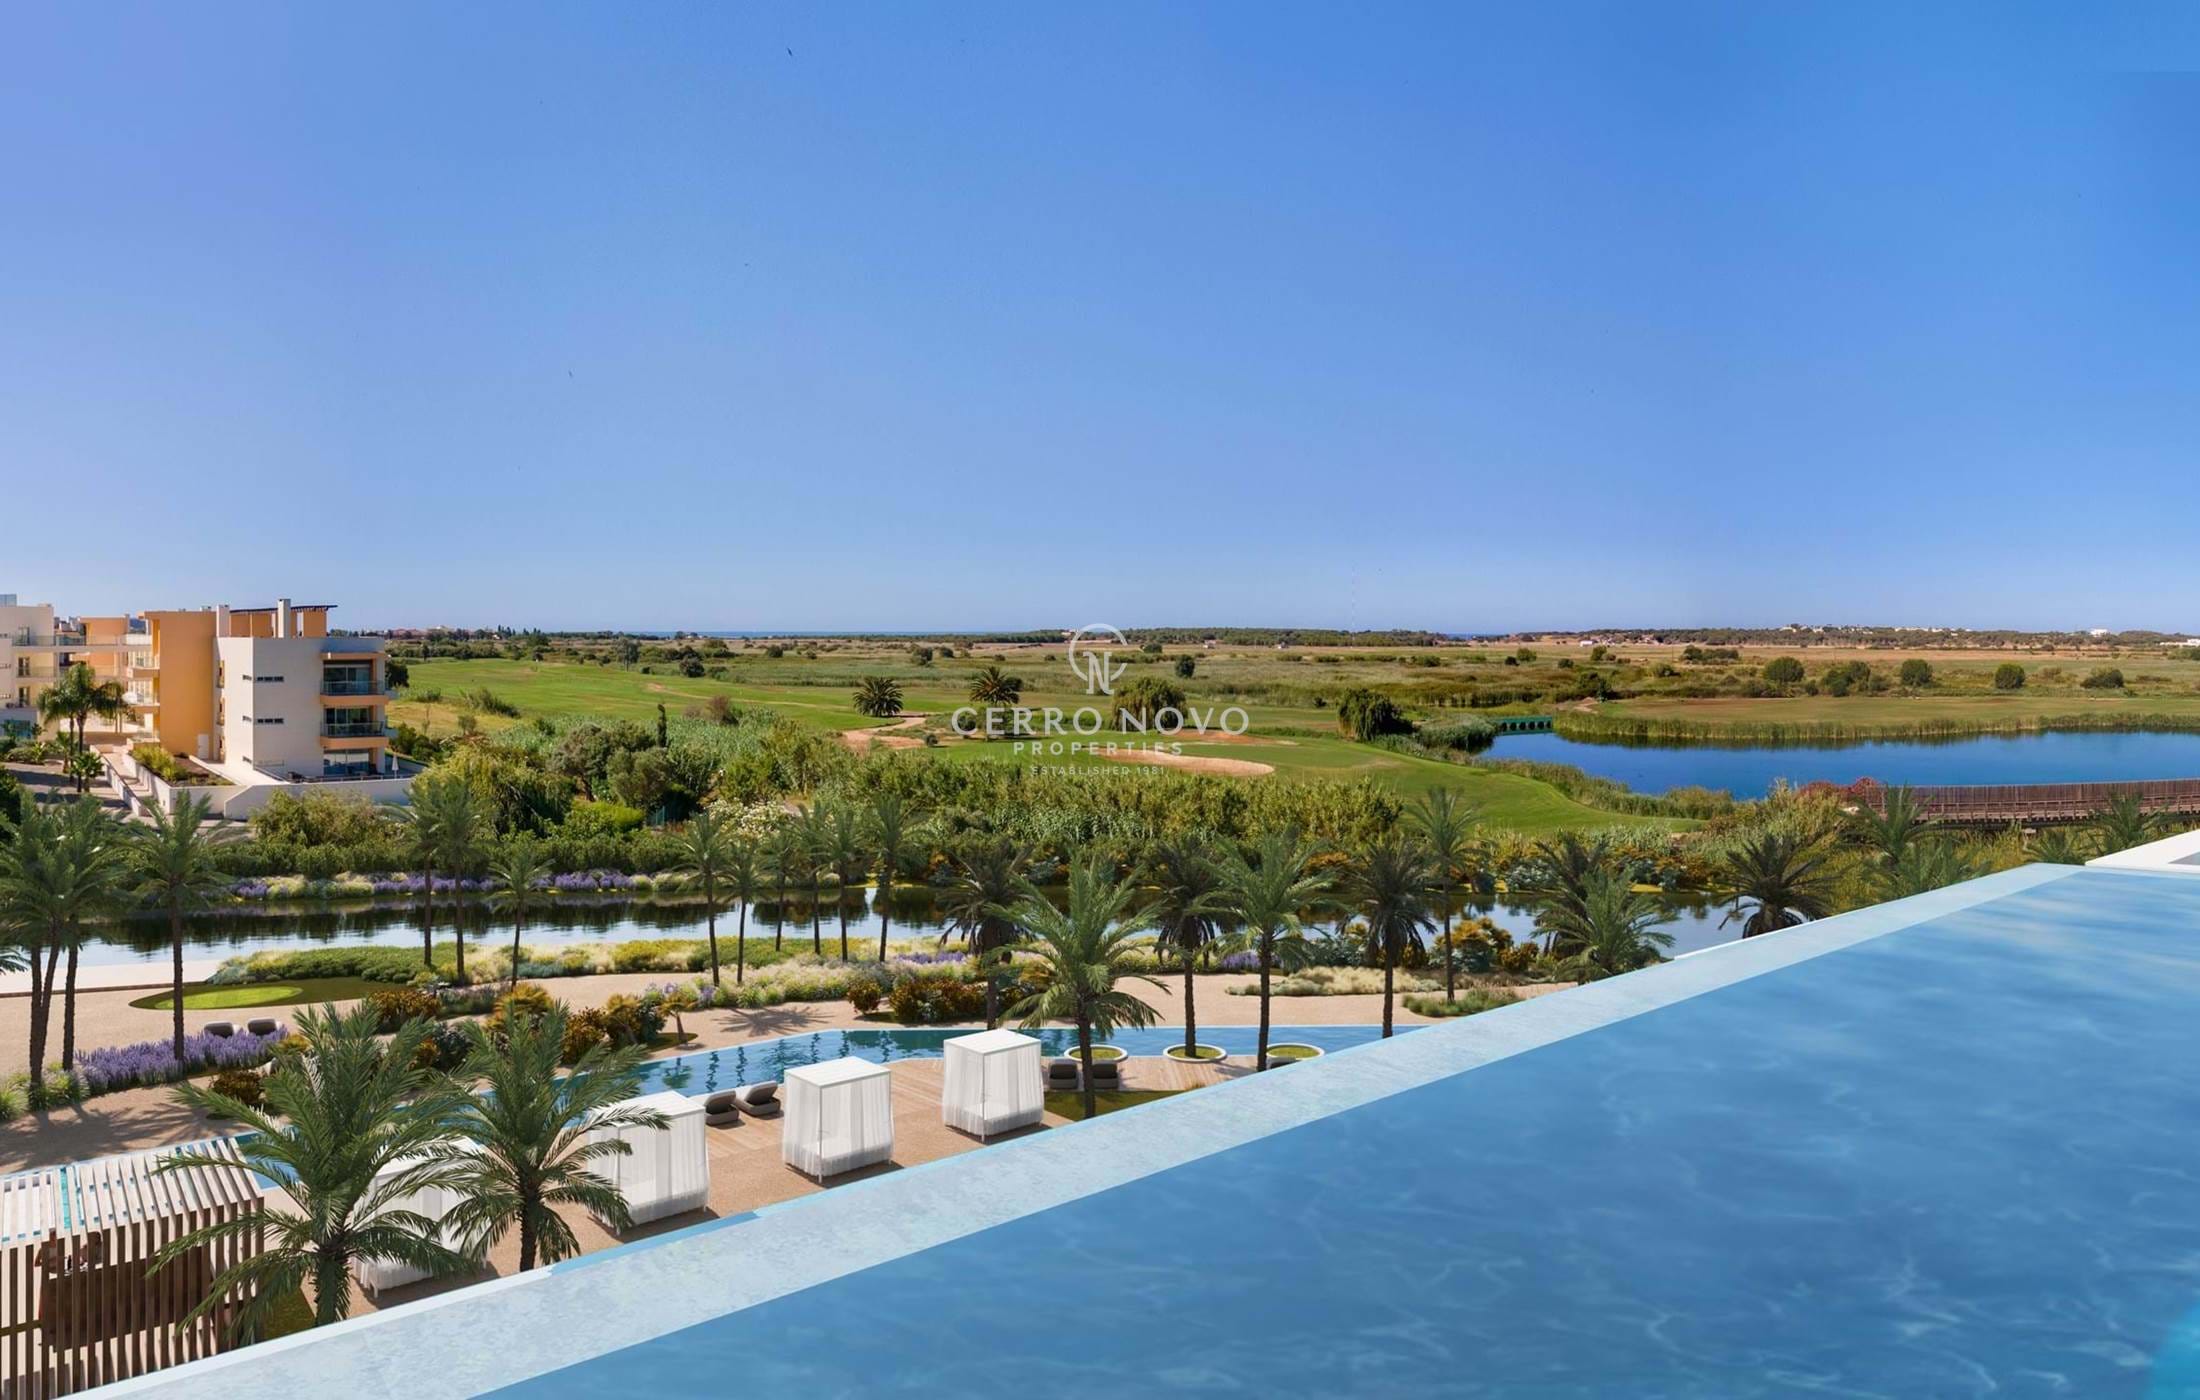 A unique, luxury apartment development in the heart of Vilamoura's golf courses and waterways.